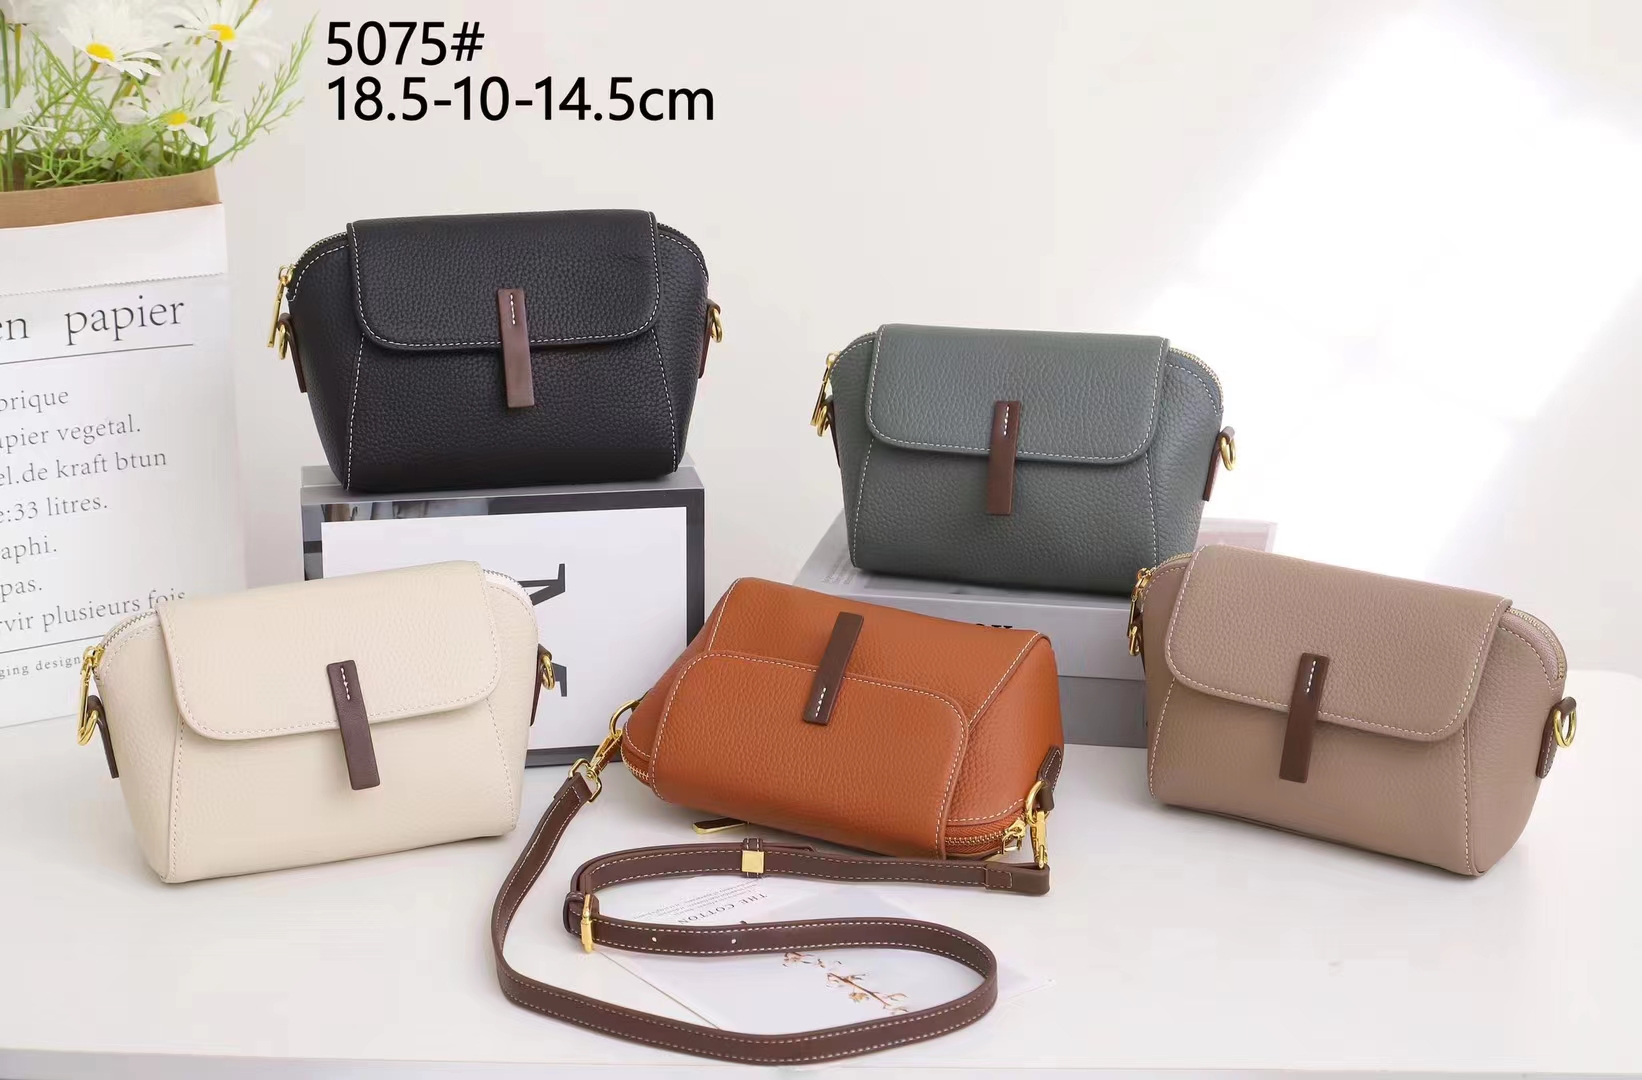 MZY Handbag Factory Manufacturing PU leather Handbags to Manufacture business to all brand clients